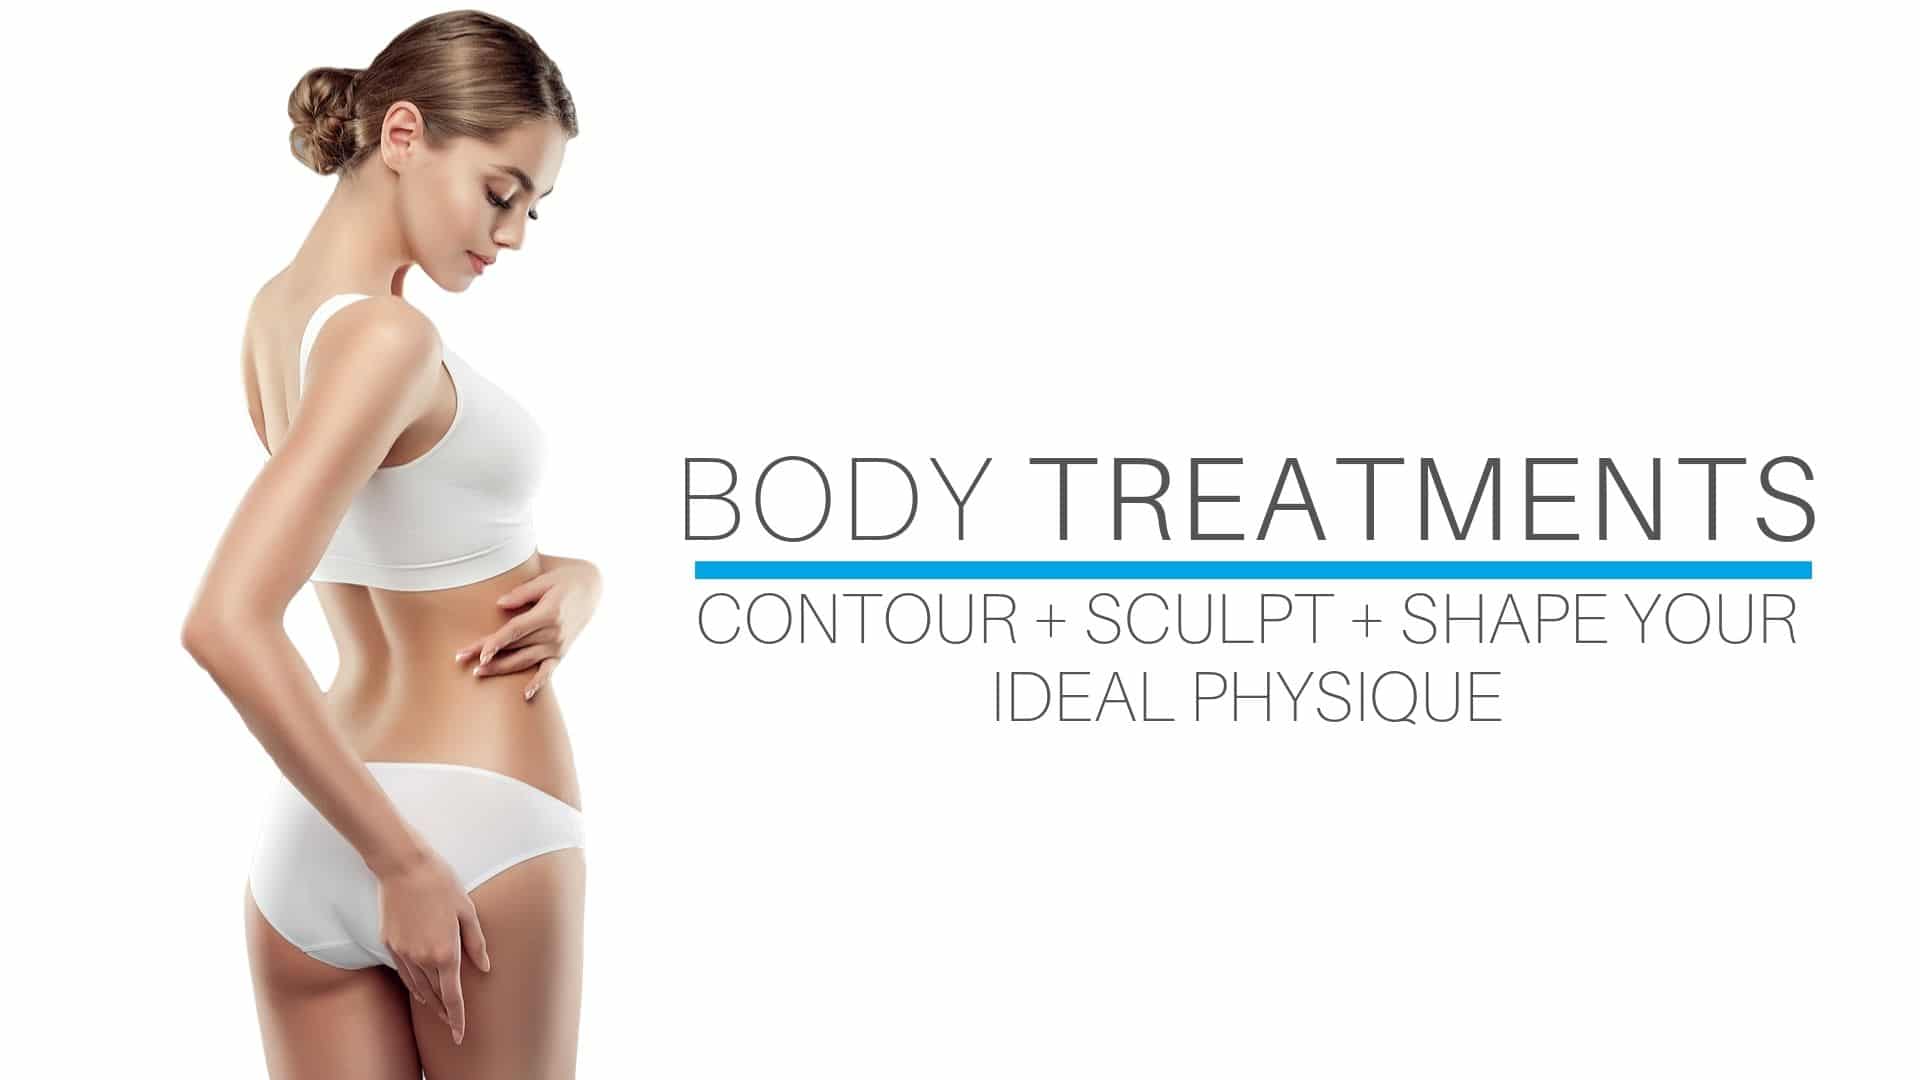 Woman touches her body smiling about results from body treatments from Docere Medspa.